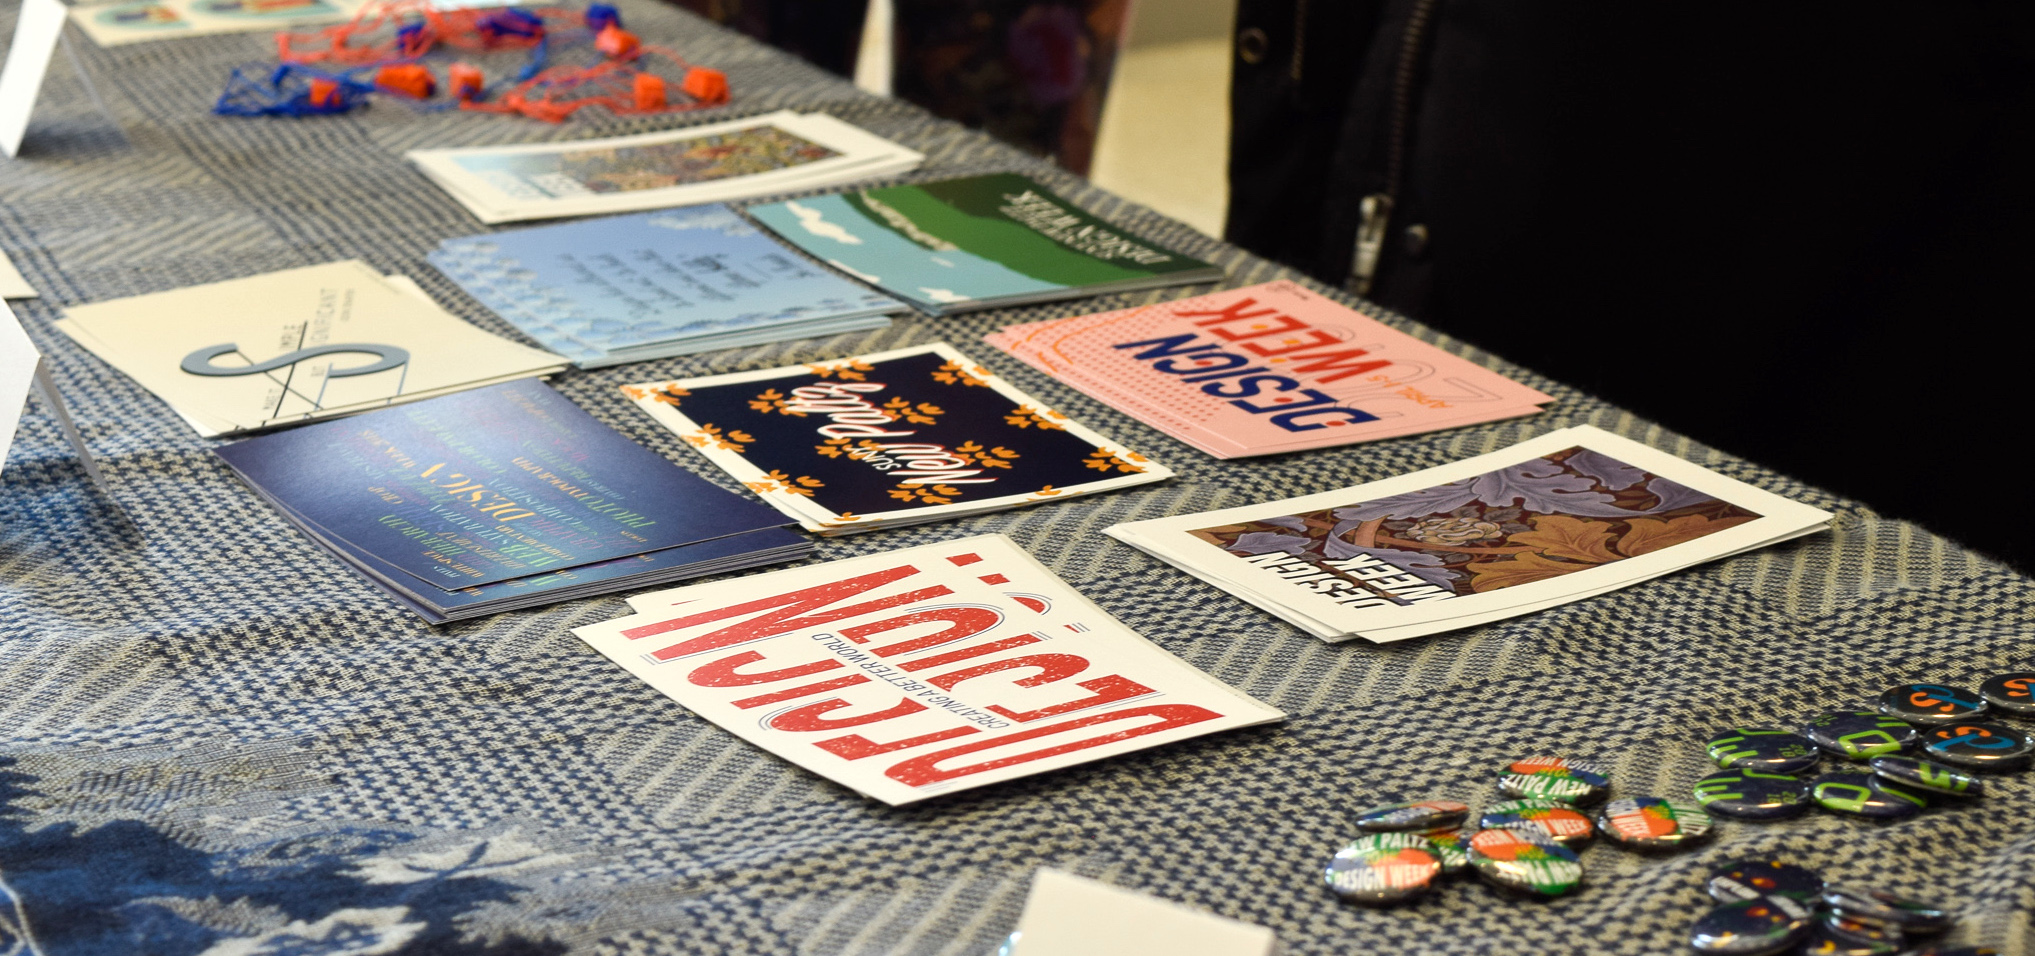 colorful postcards and buttons designed by students on a table